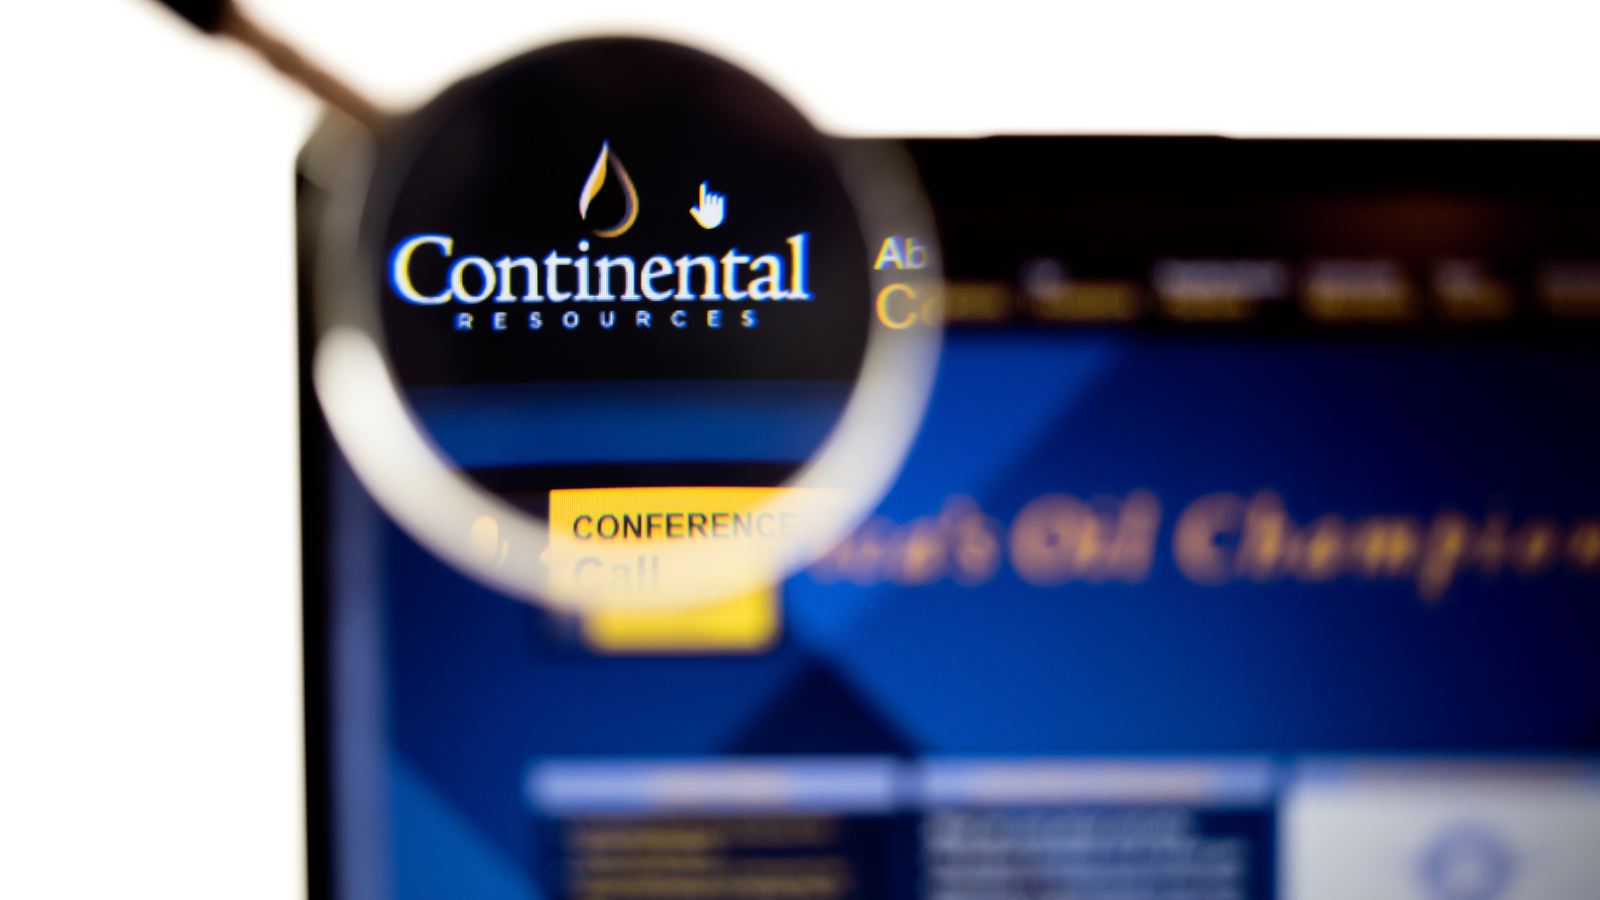 Continental Resources Inc logo visible on display screen. CLR stock.